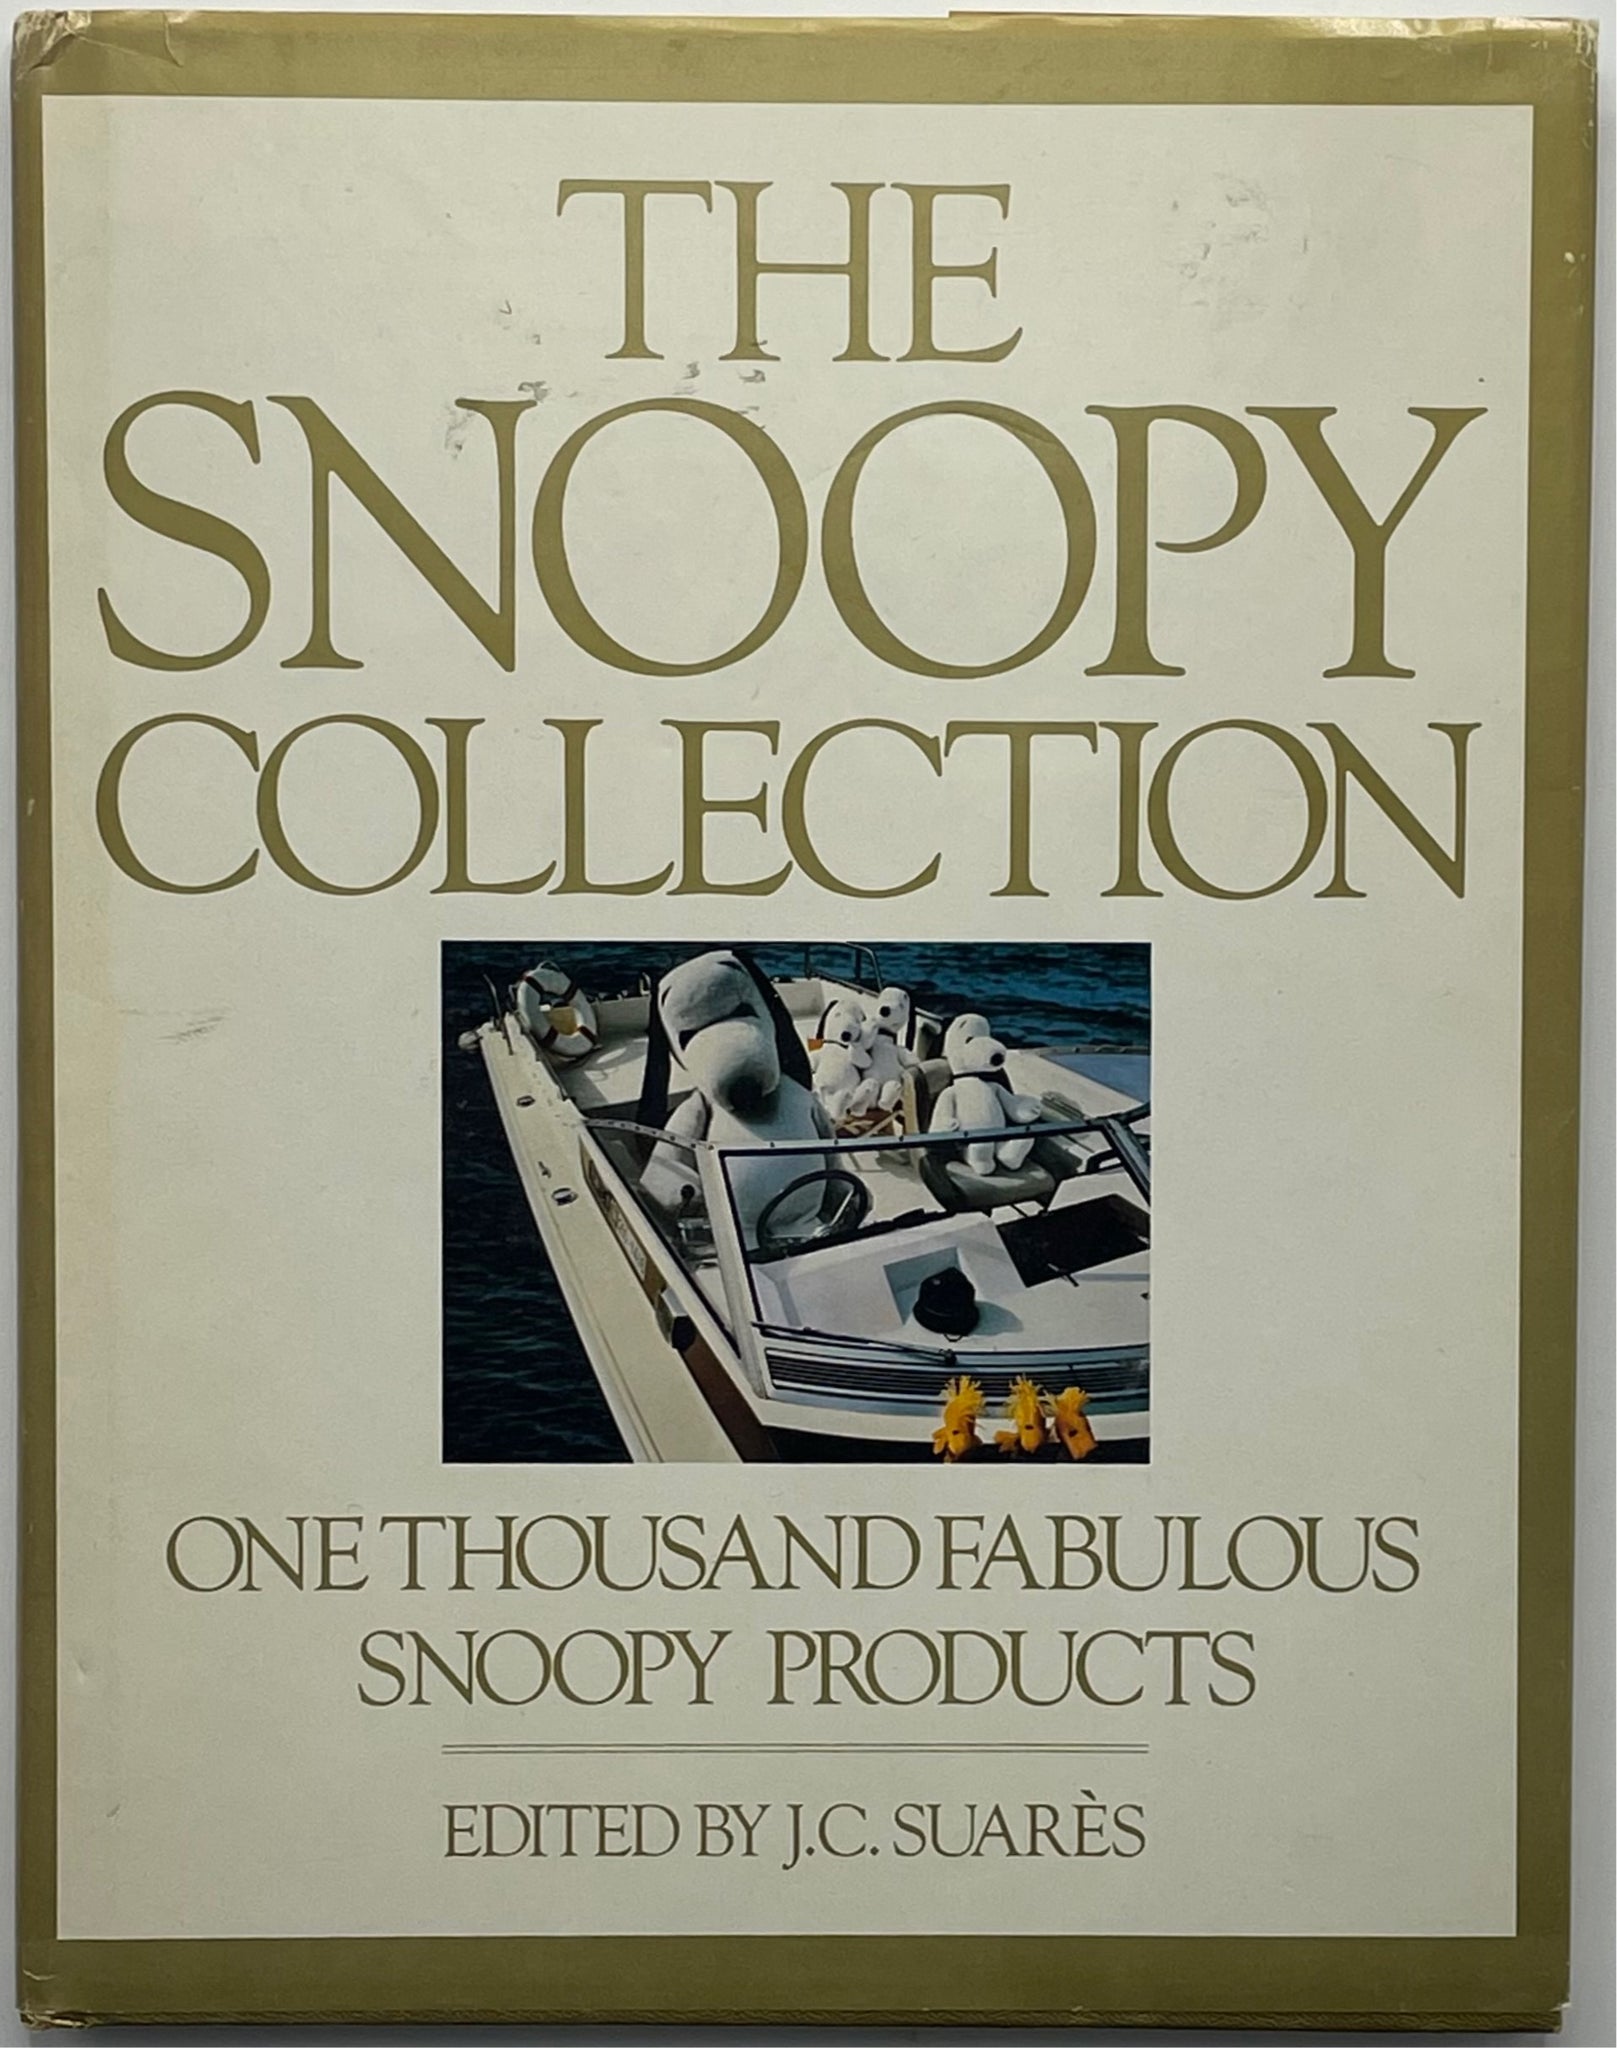 snoopy collection